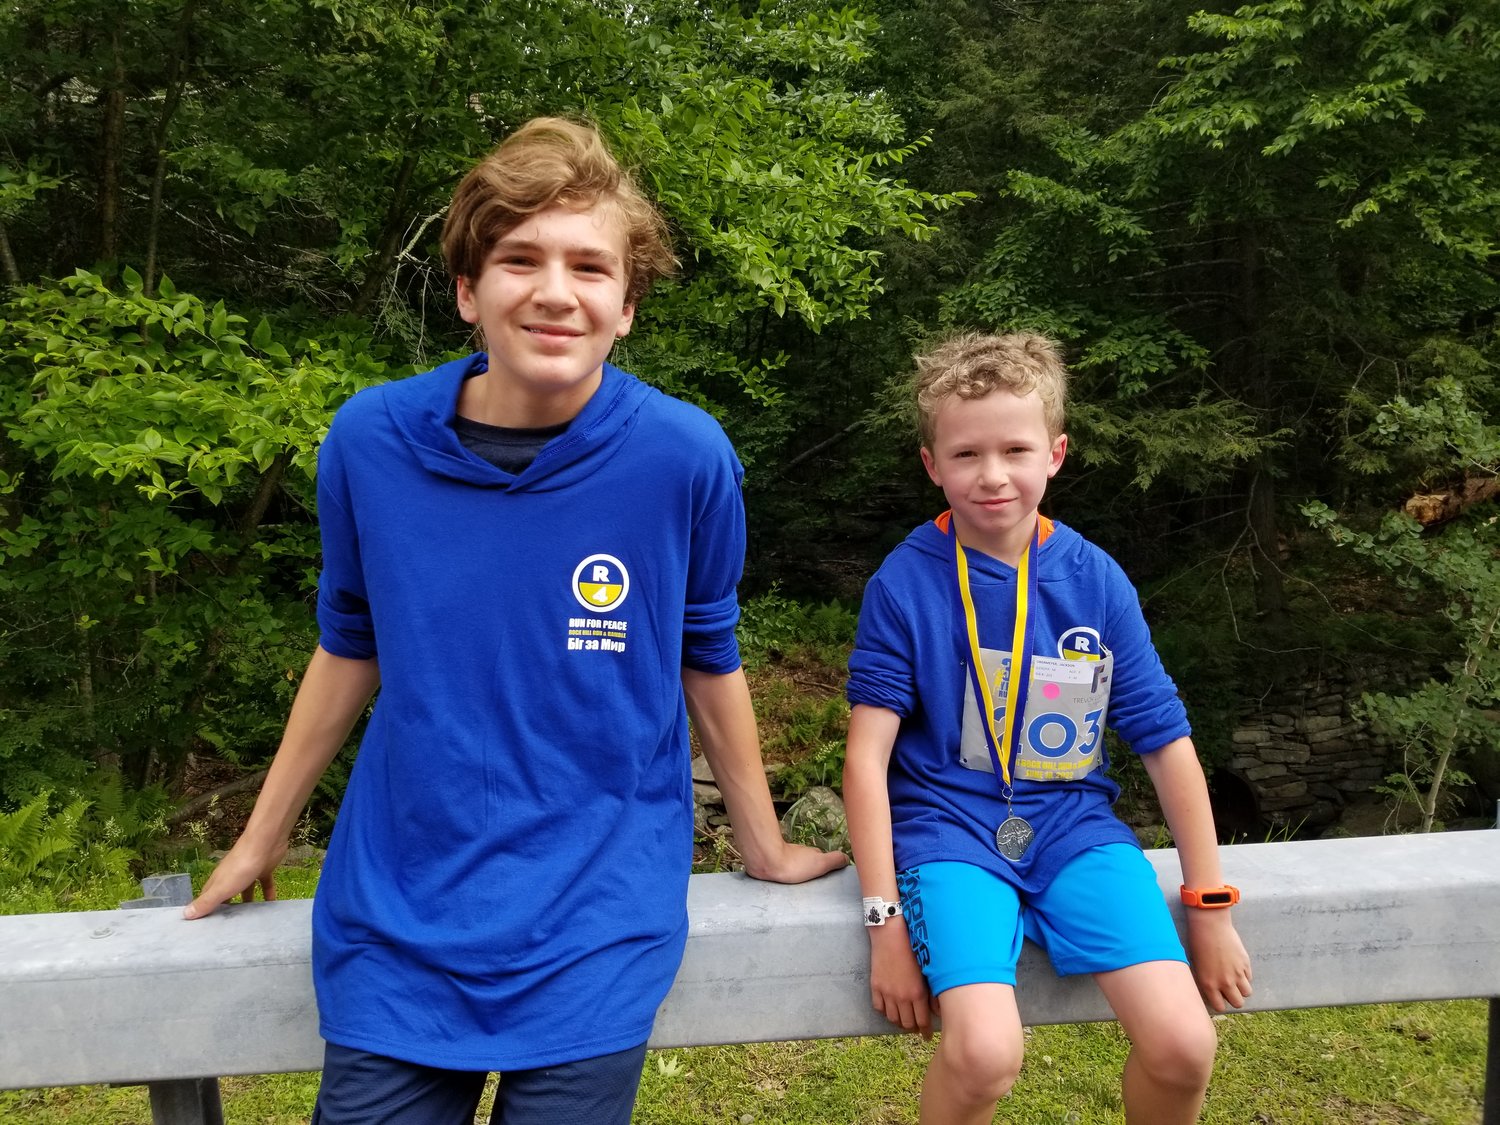 Samuel Bolduc, 14, and Jackson Obermeyer, 8, neighbors, ran the race together for the first time.